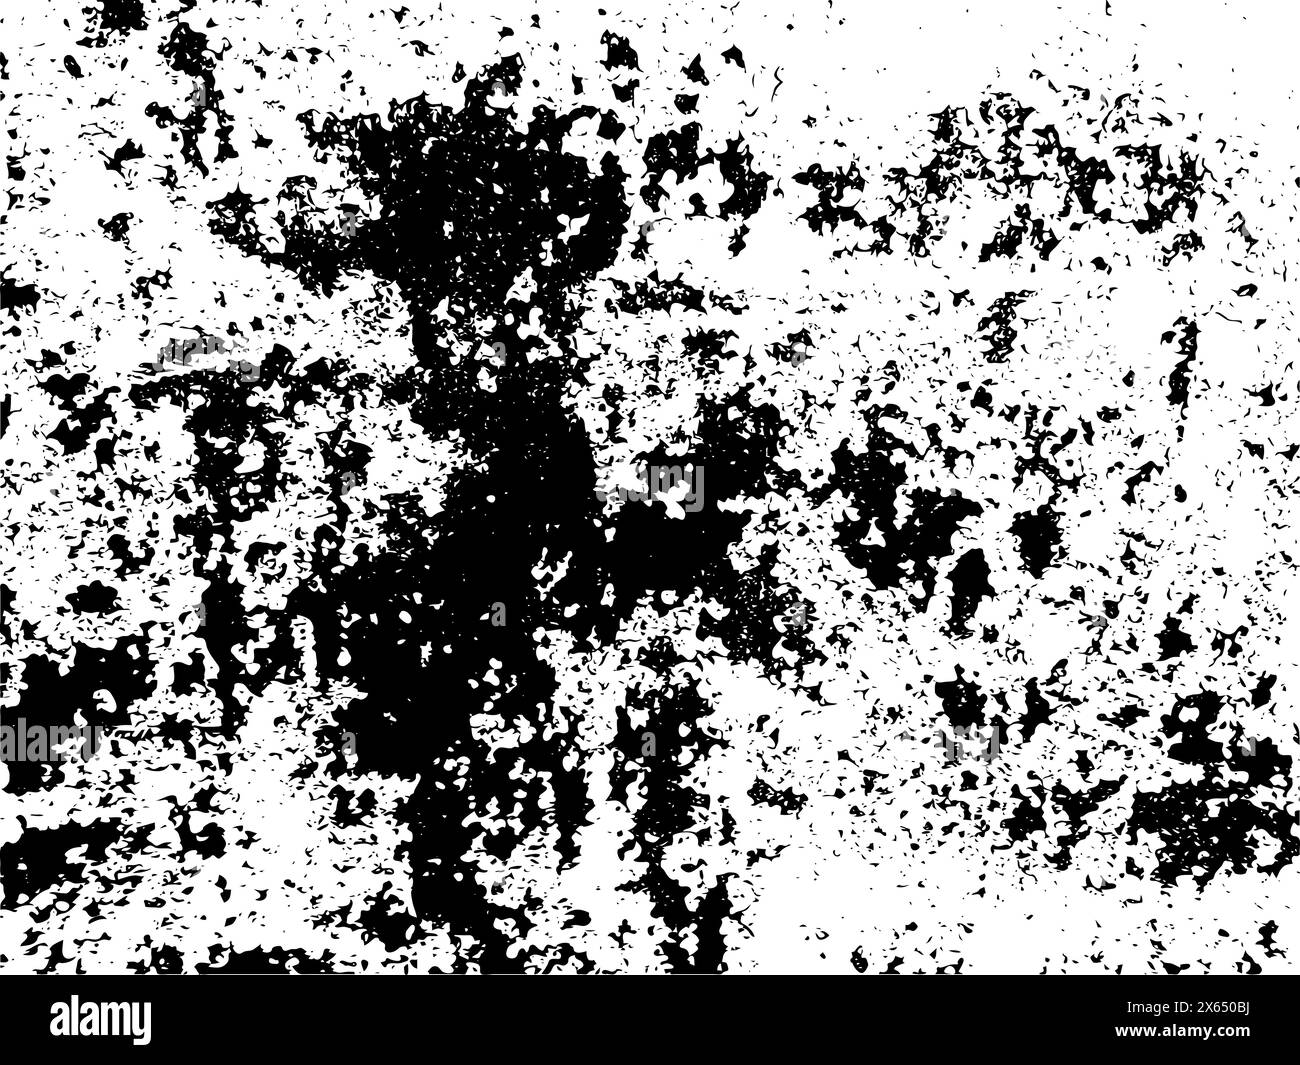 Grunge grainy dirty texture. Abstract urban distress overlay background. Vector illustration Stock Vector